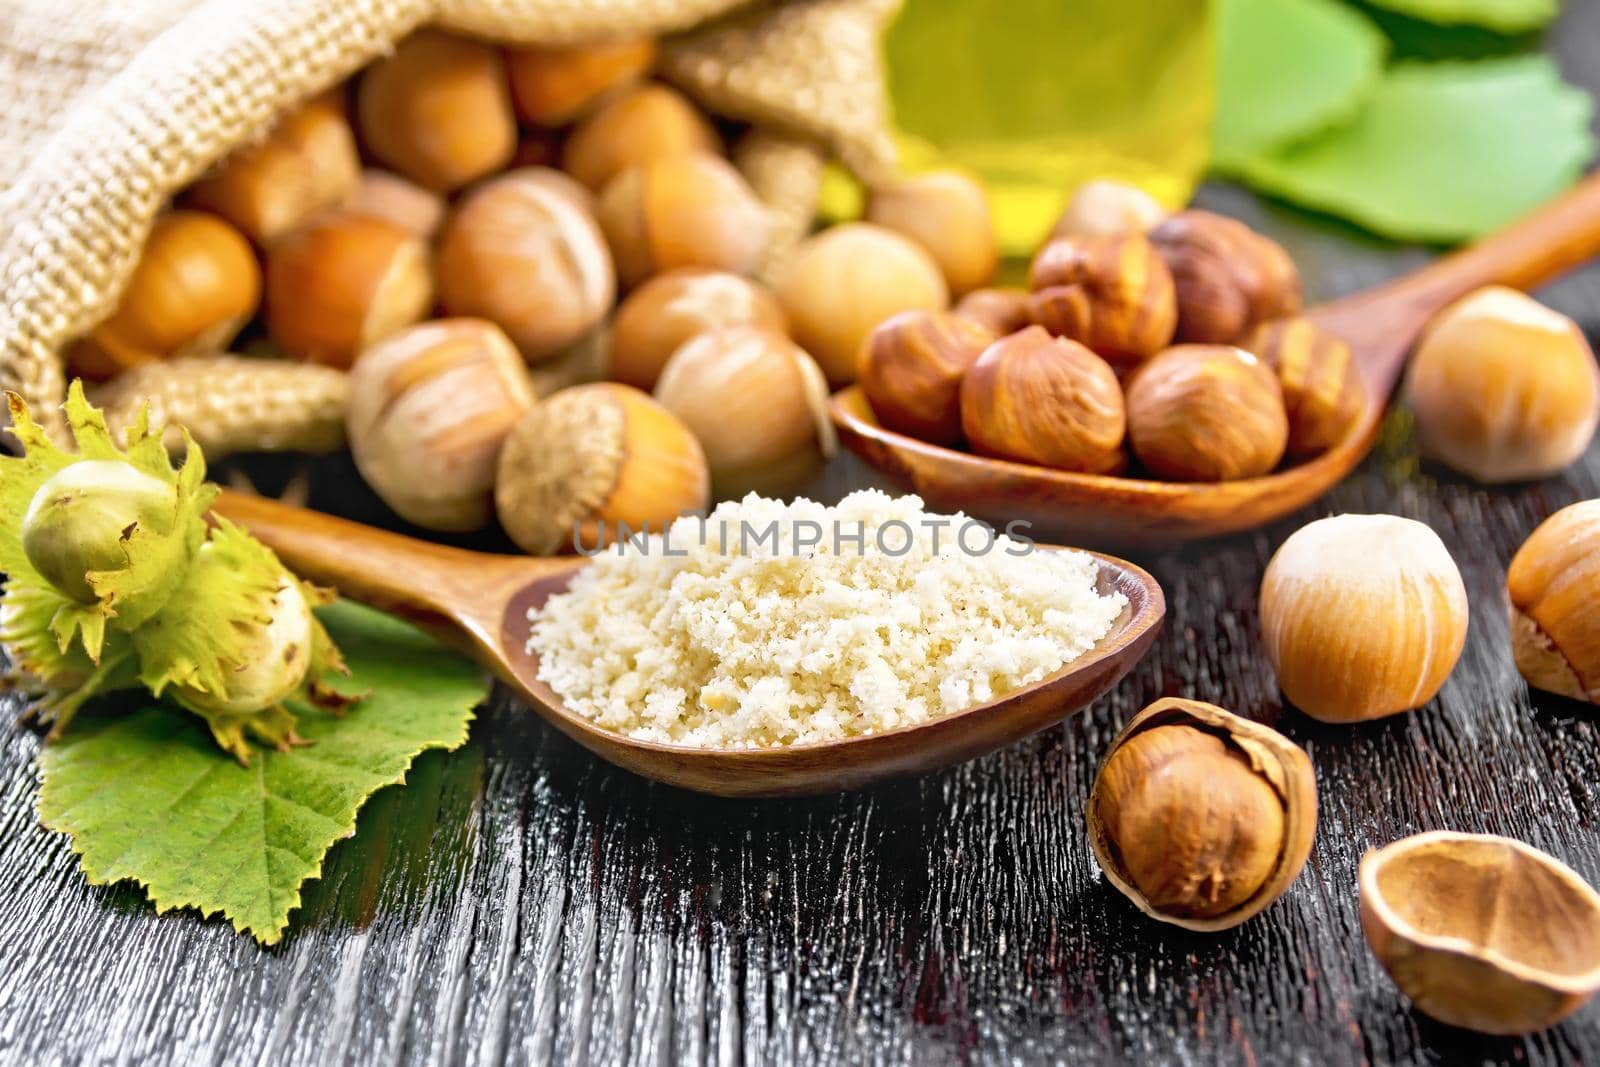 Hazelnut flour in a spoon, nuts in a bag, spoon and on the table, oil in glass jar and filbert branch with green leaves on dark wooden board background